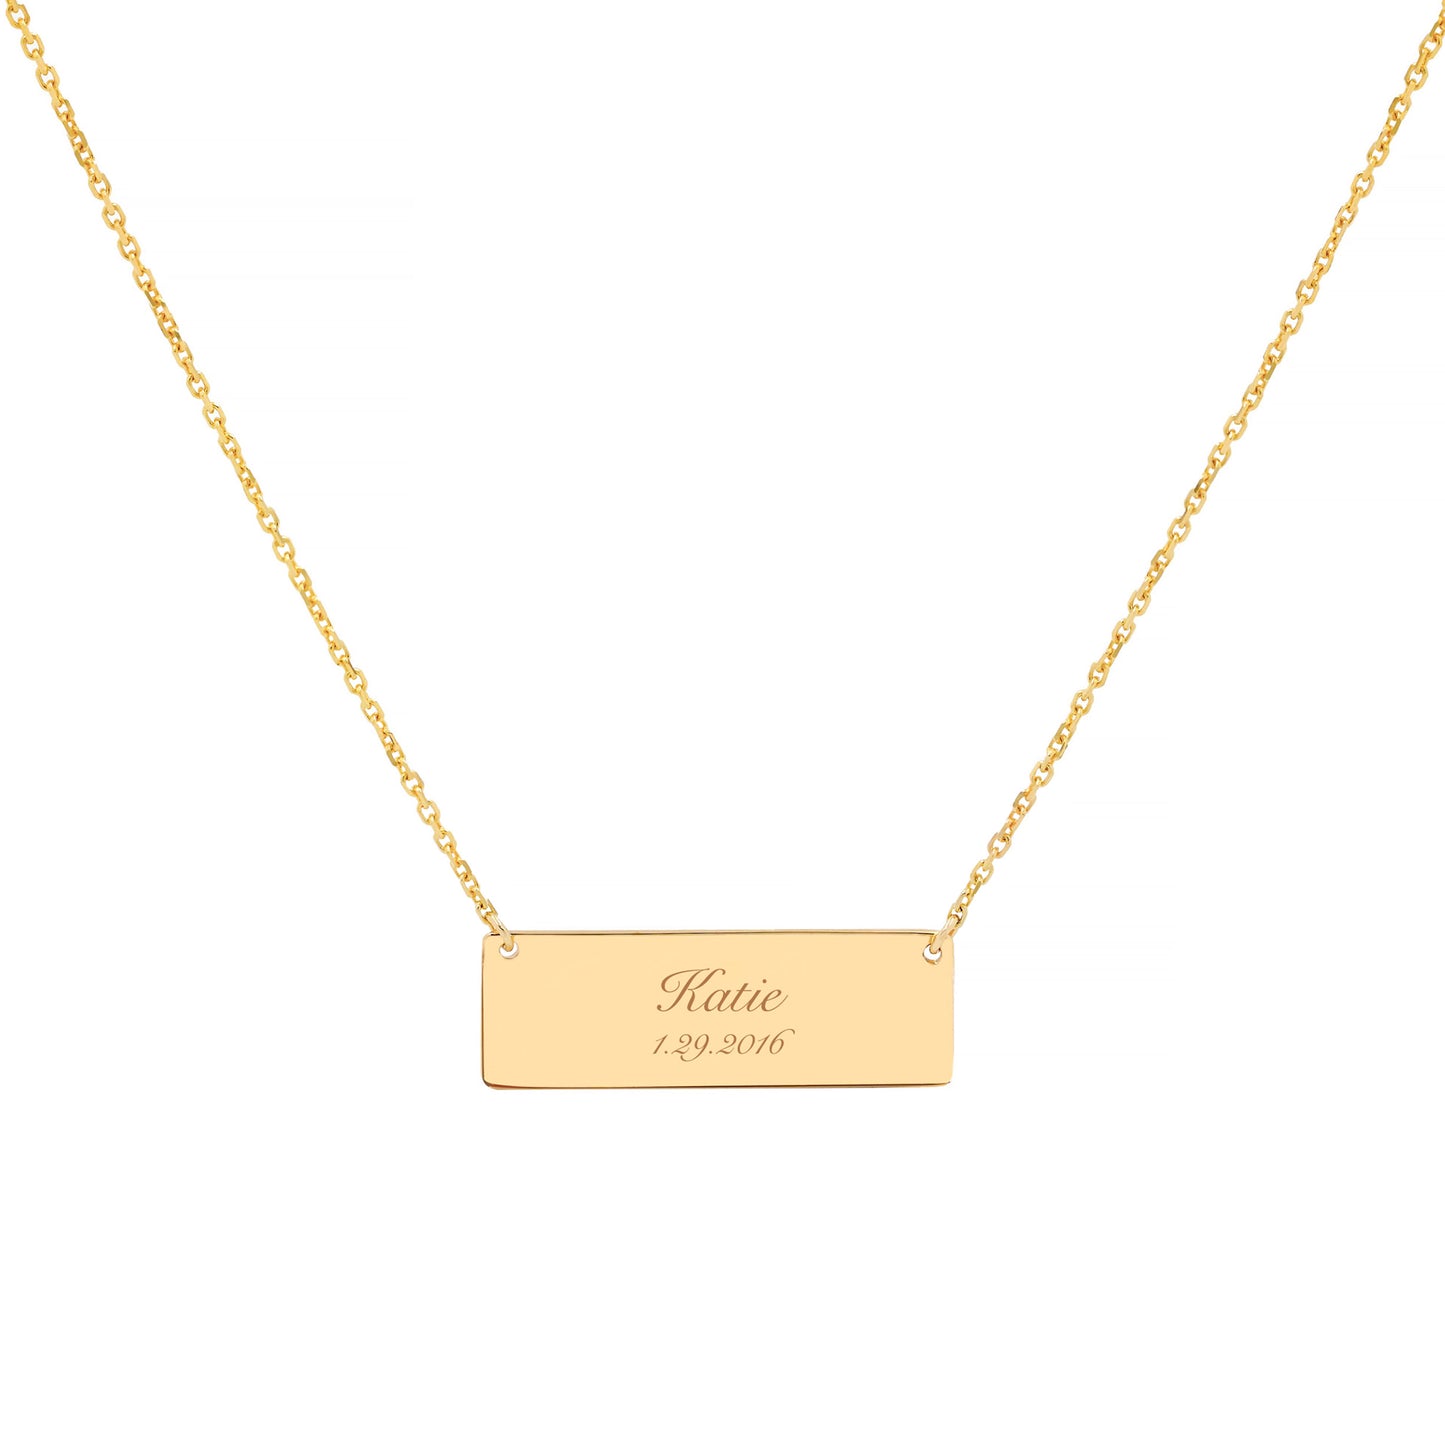 Footprints Mathis LOVE Necklace in 14K Gold